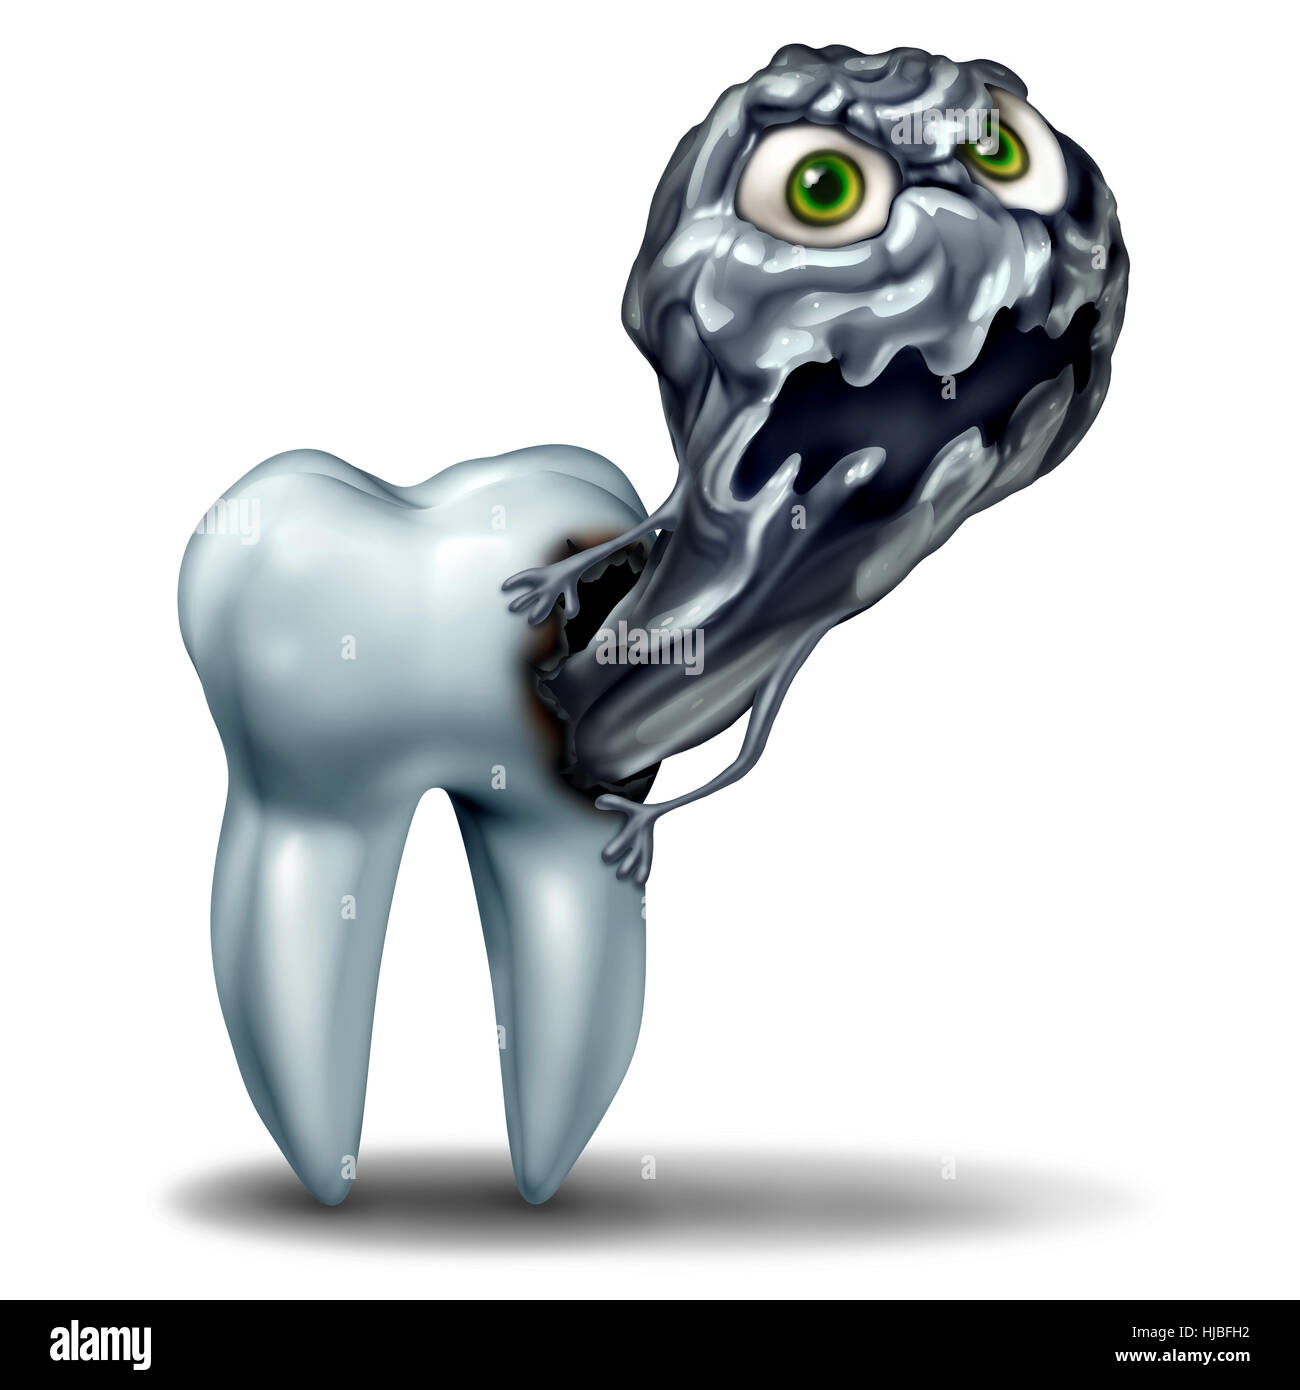 Tooth cavity monster concept as a decaying character representing dental rot emerging out as a dentist health and dental care symbol for oral hygiene Stock Photo